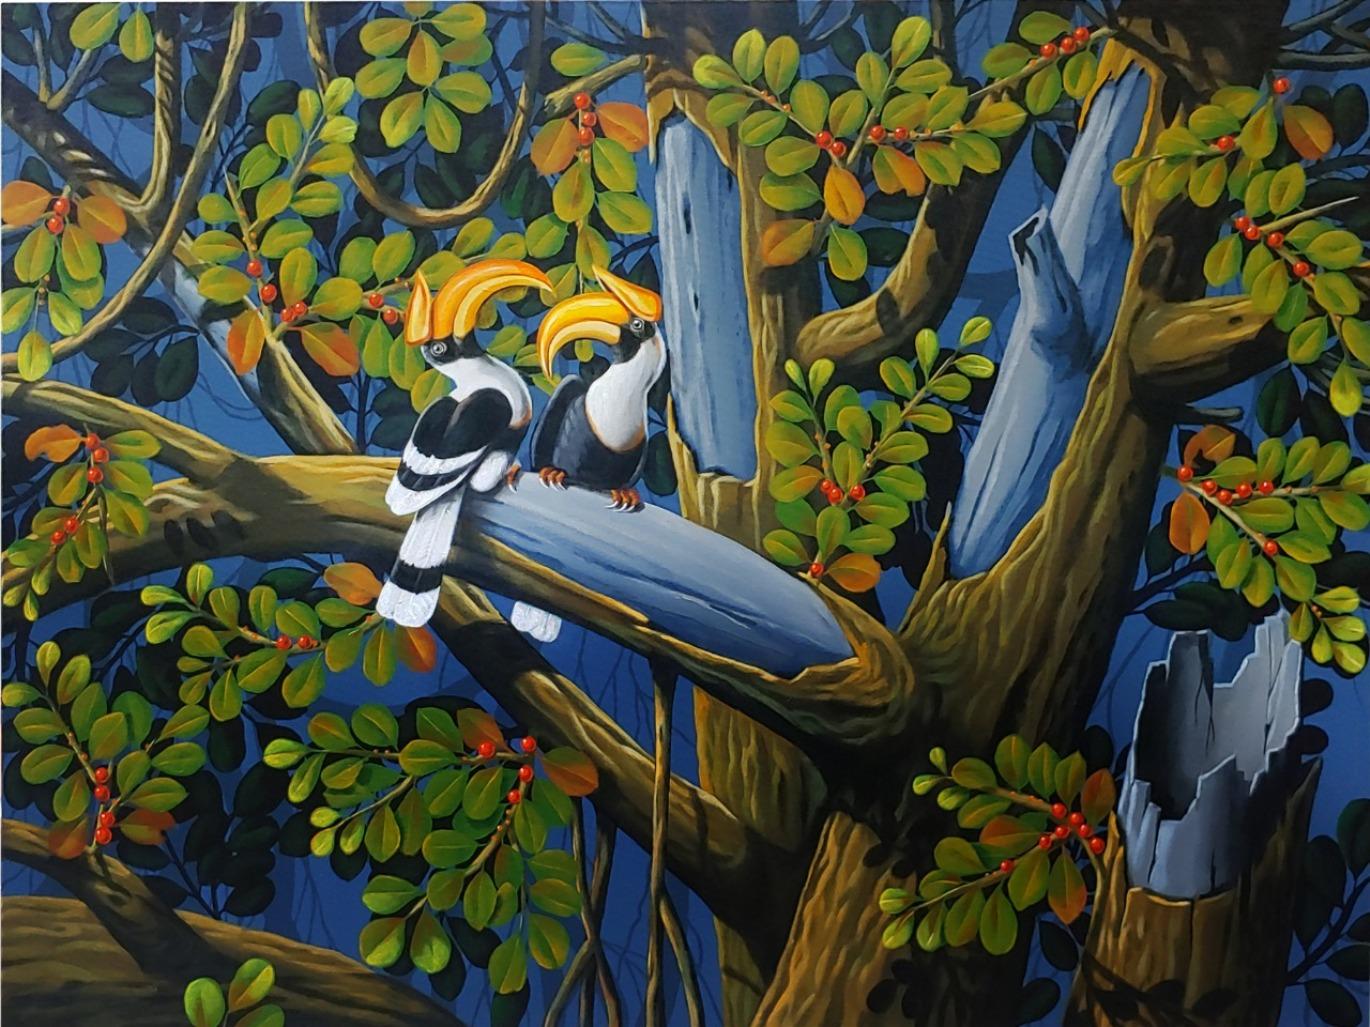 Varghese Kalathil Figurative Painting - The Hornbills, Acrylic on Canvas, Black, Green by Contemporary Artist "In Stock"